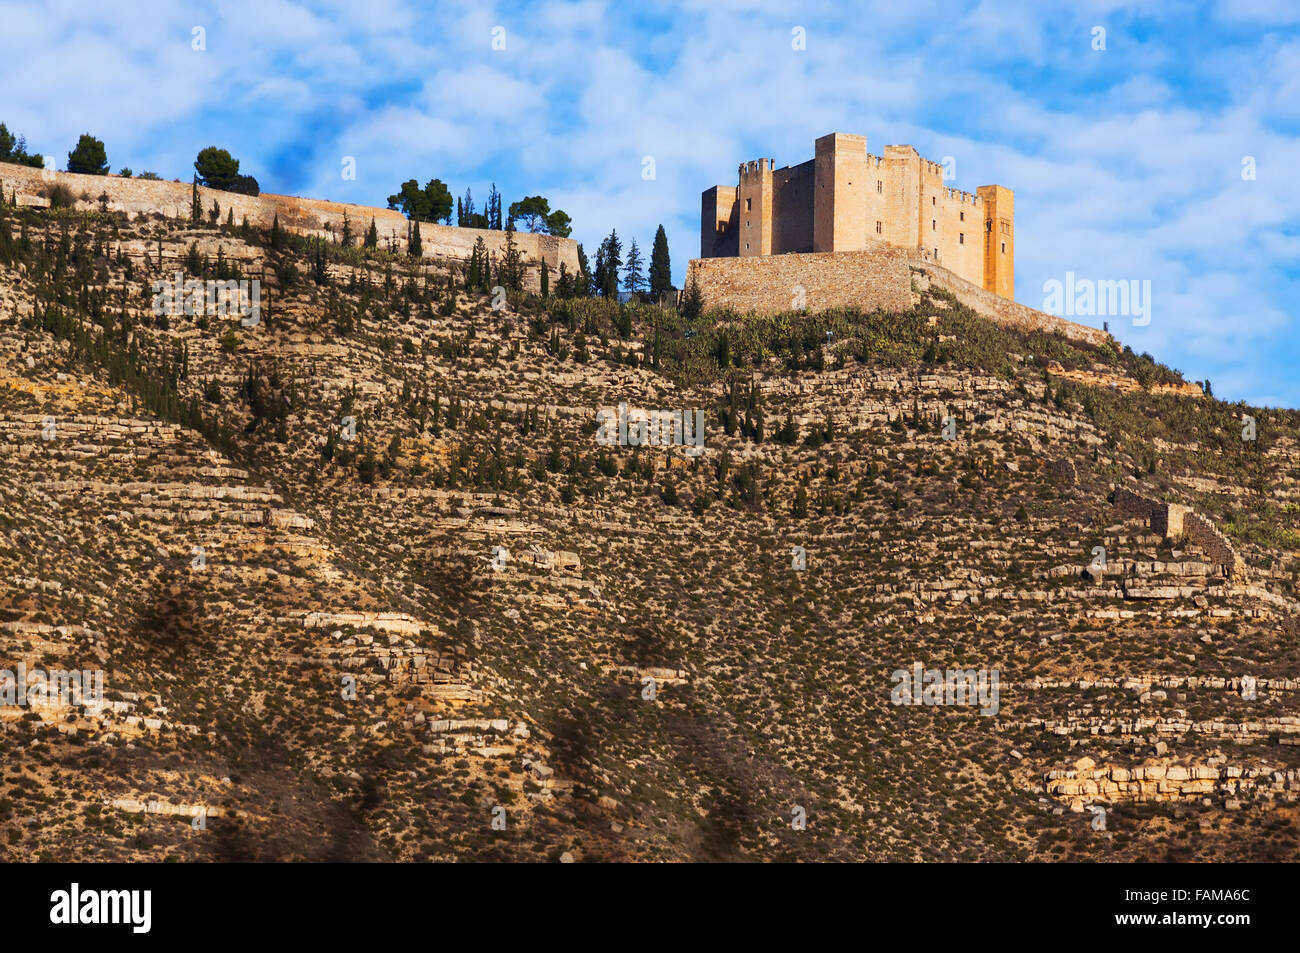 View of Castle of Mequinenza.   Spain Stock Photo